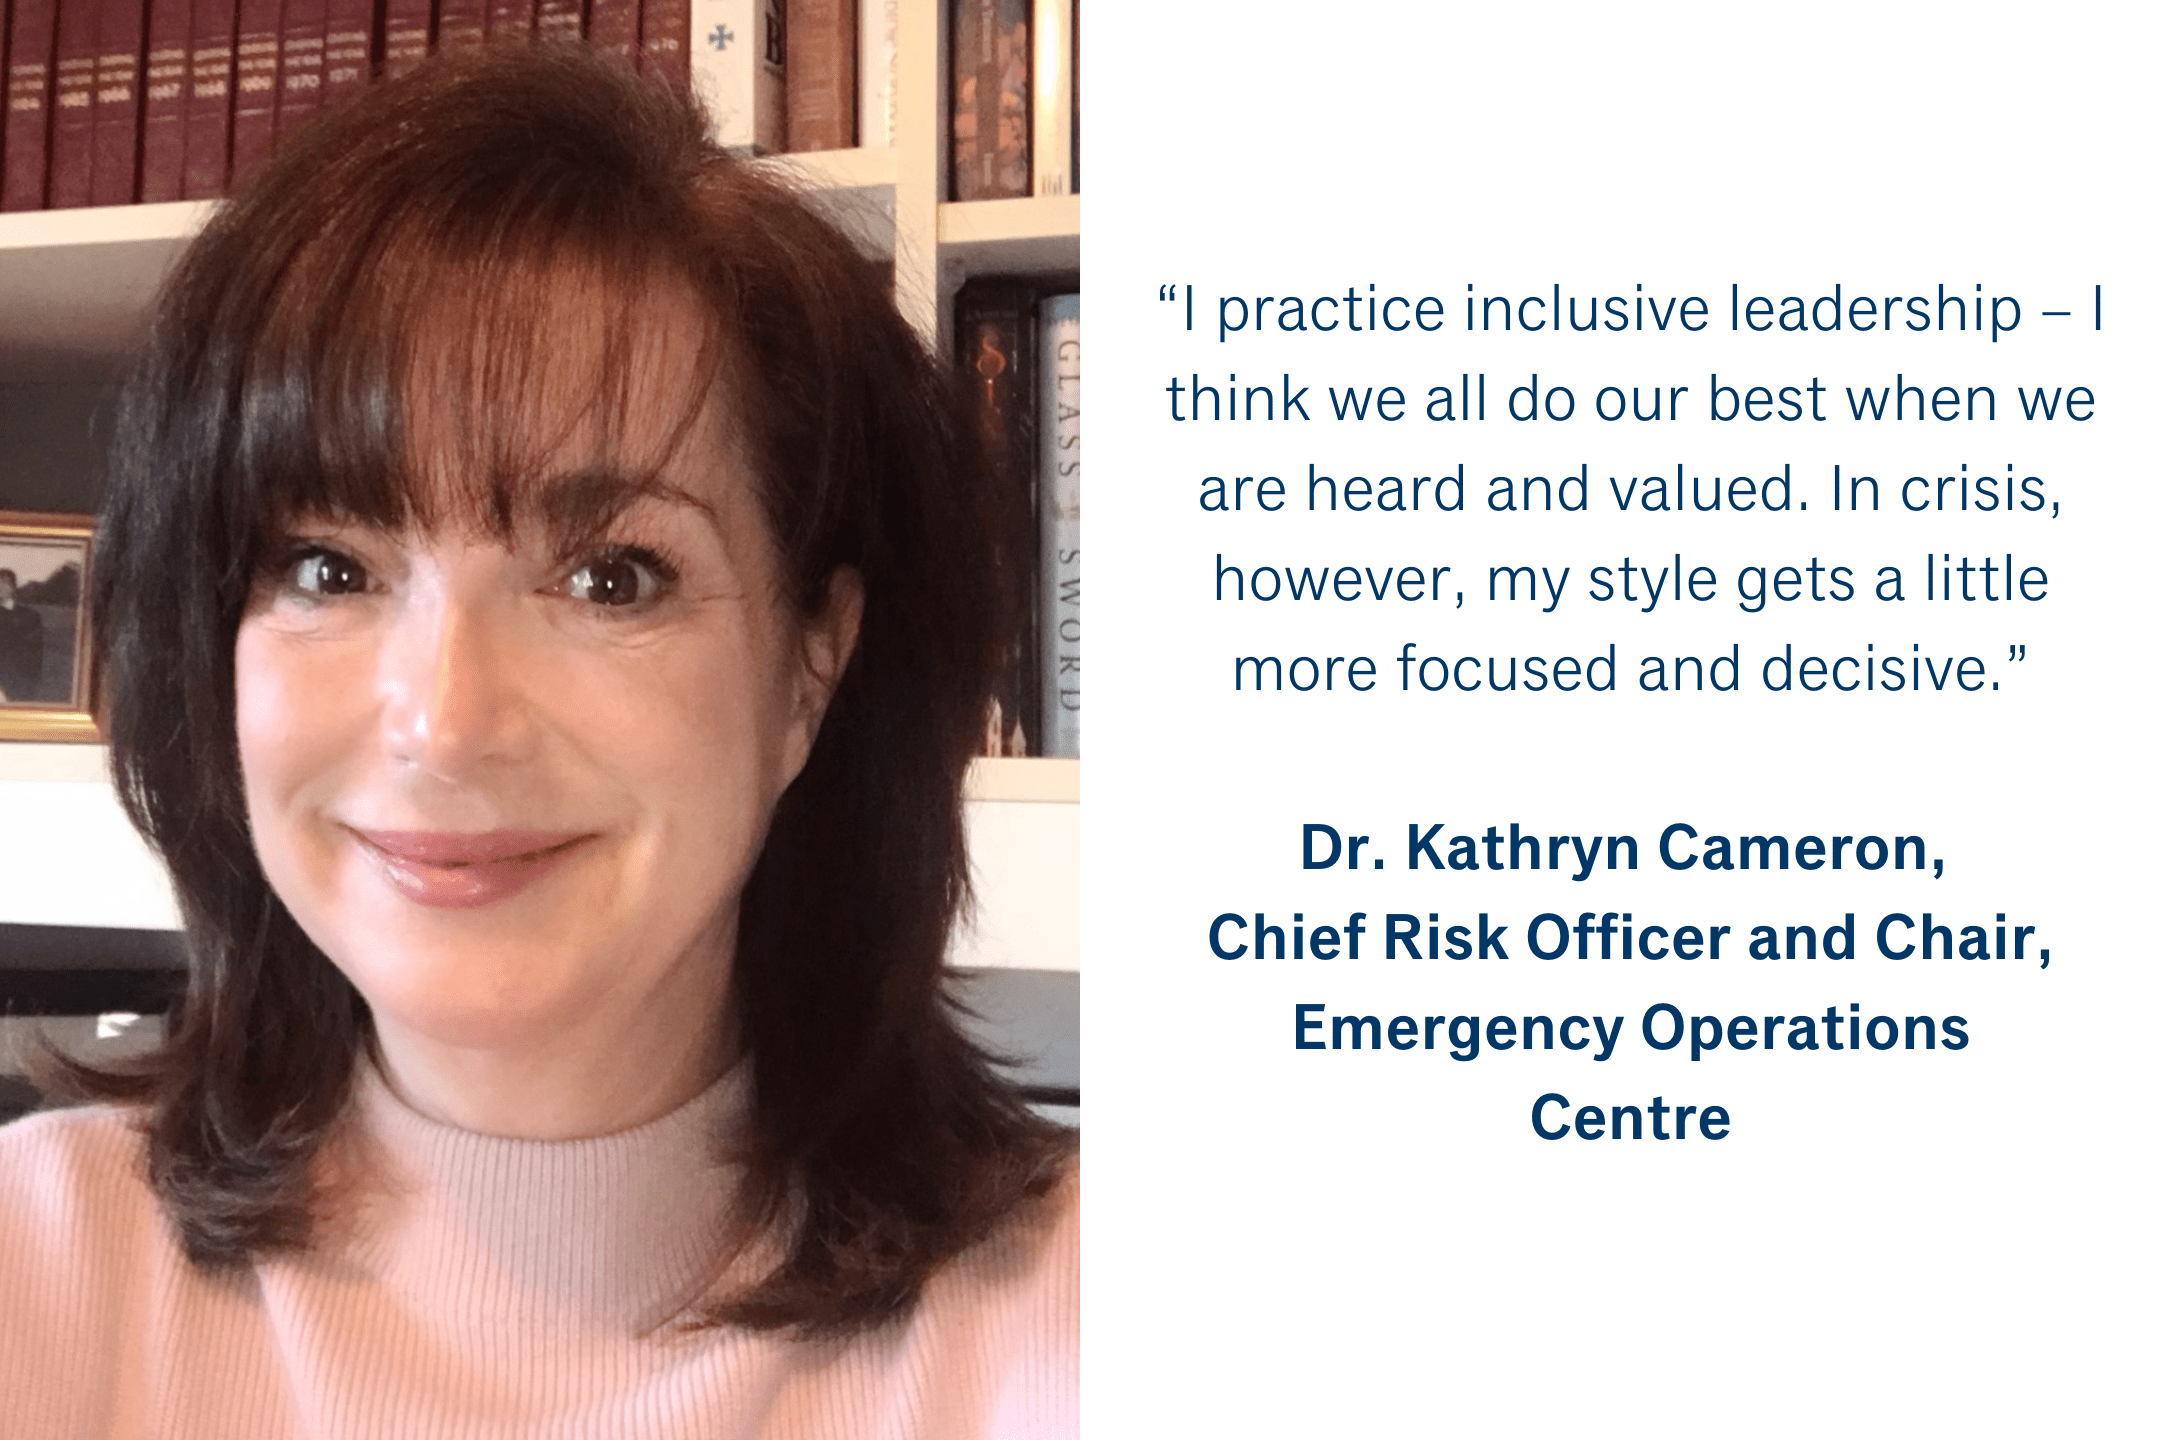 “I practice inclusive leadership – I think we all do our best when we are heard and valued.  In crisis, however, my style gets a little more focused and decisive.” - Dr. Kathryn Cameron, Chief Risk Officer and Chair, Sheridan Emergency Operations Centre